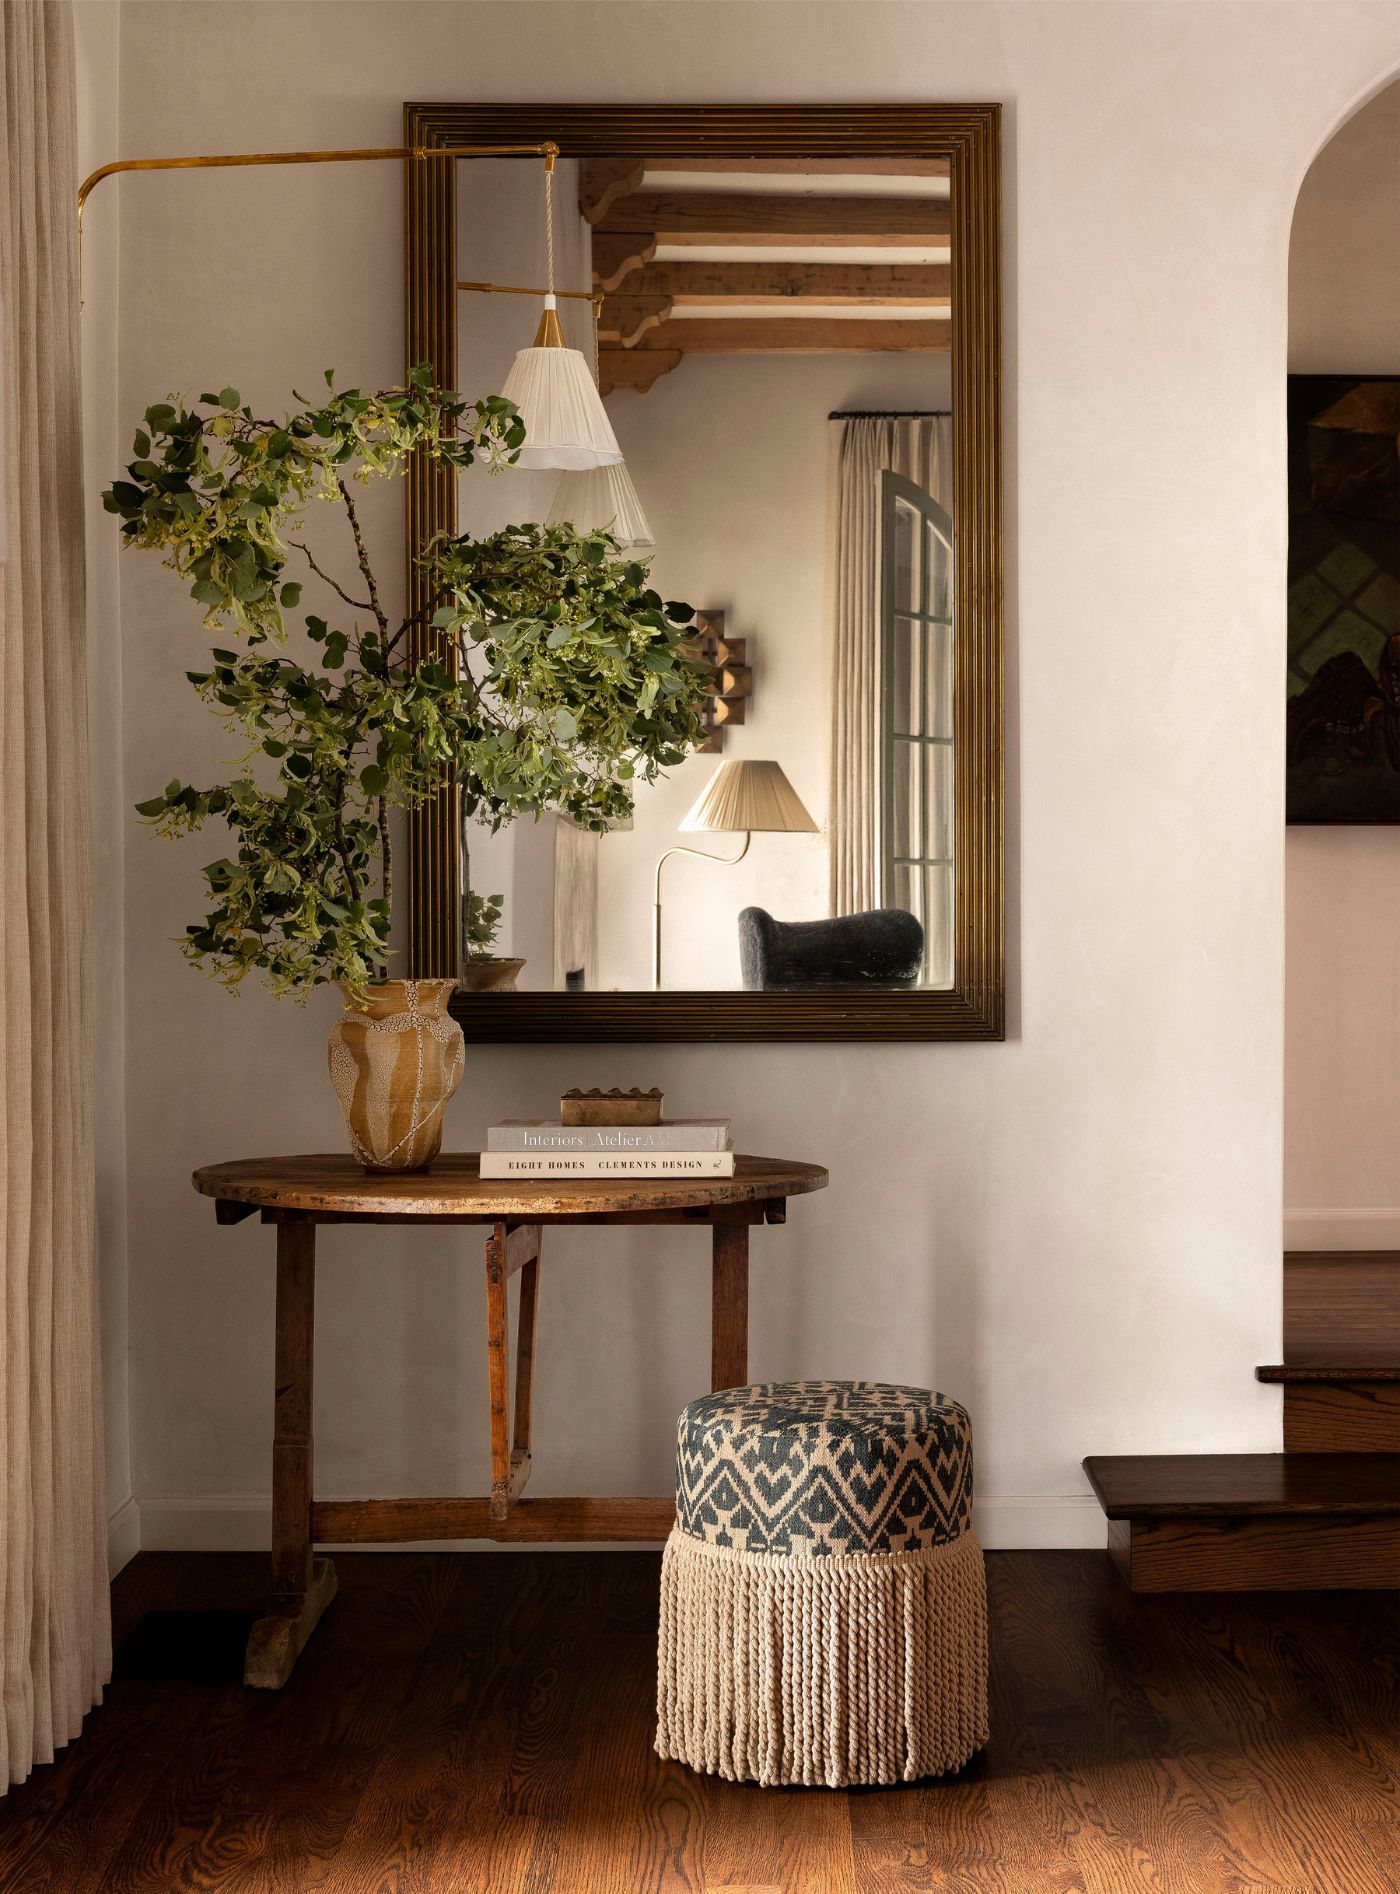 Inviting Entryways Transform Your Space with Style